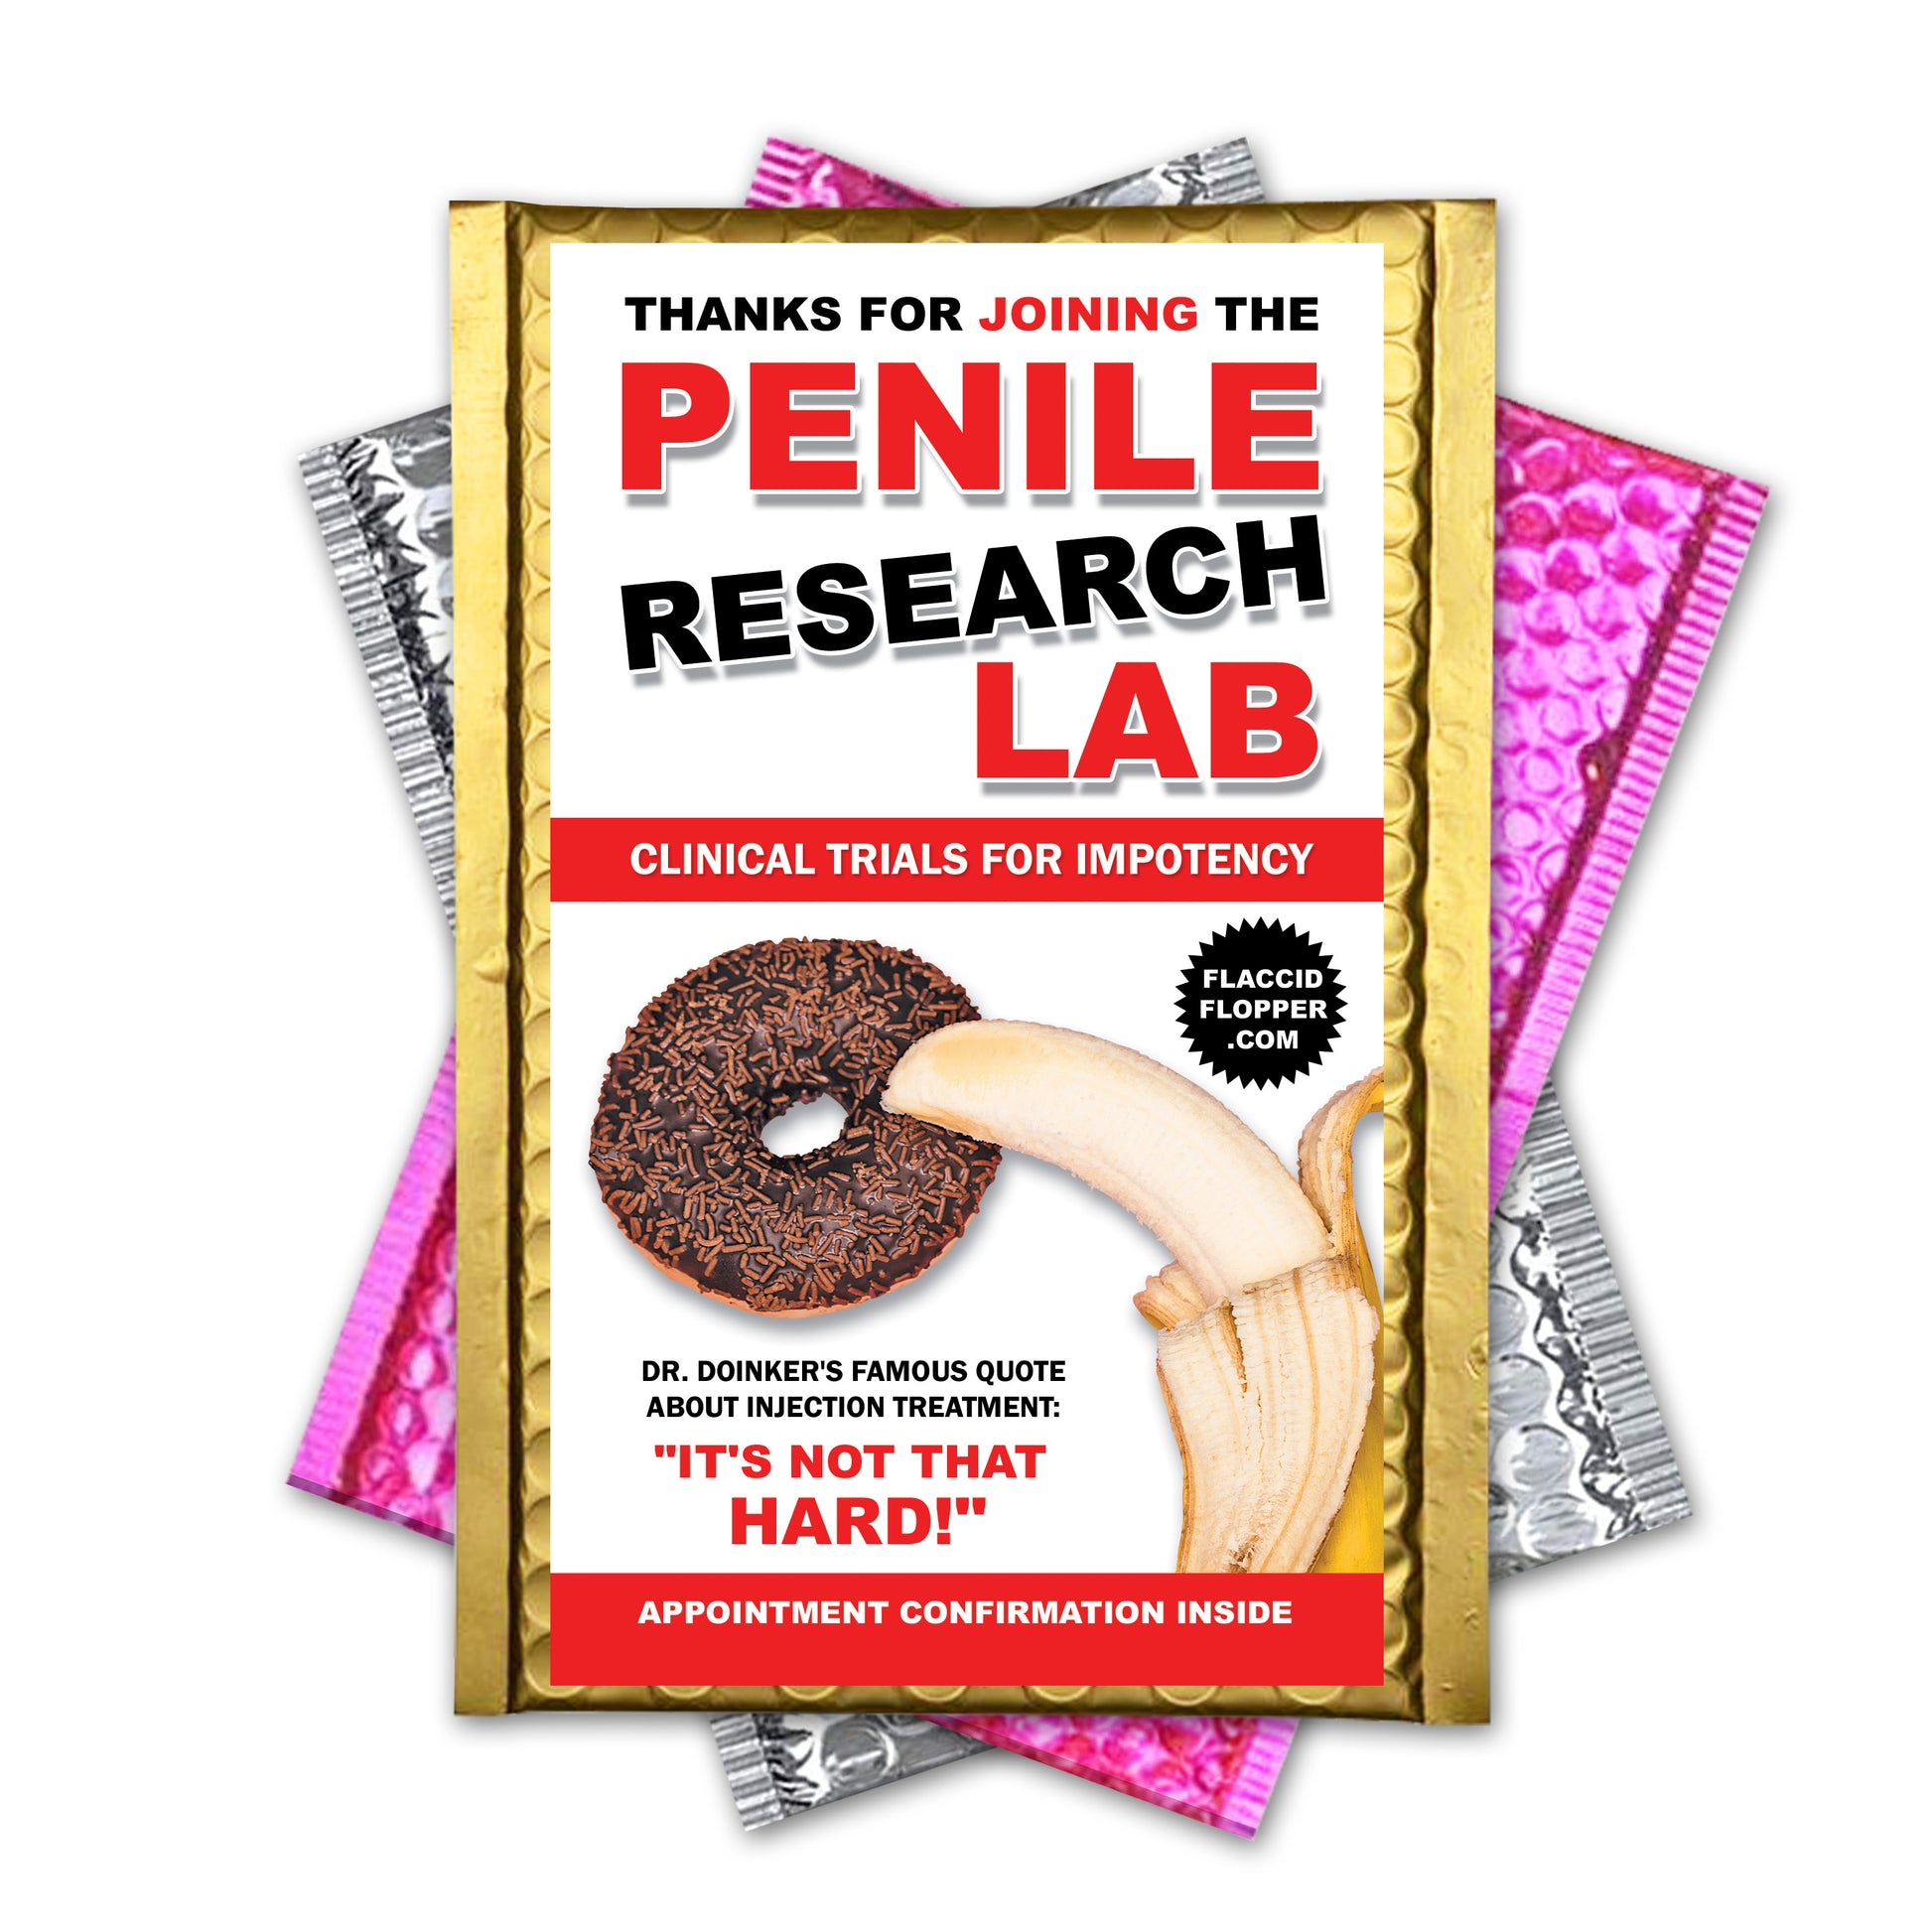 Penile Research Labs Gag Gift Mailer